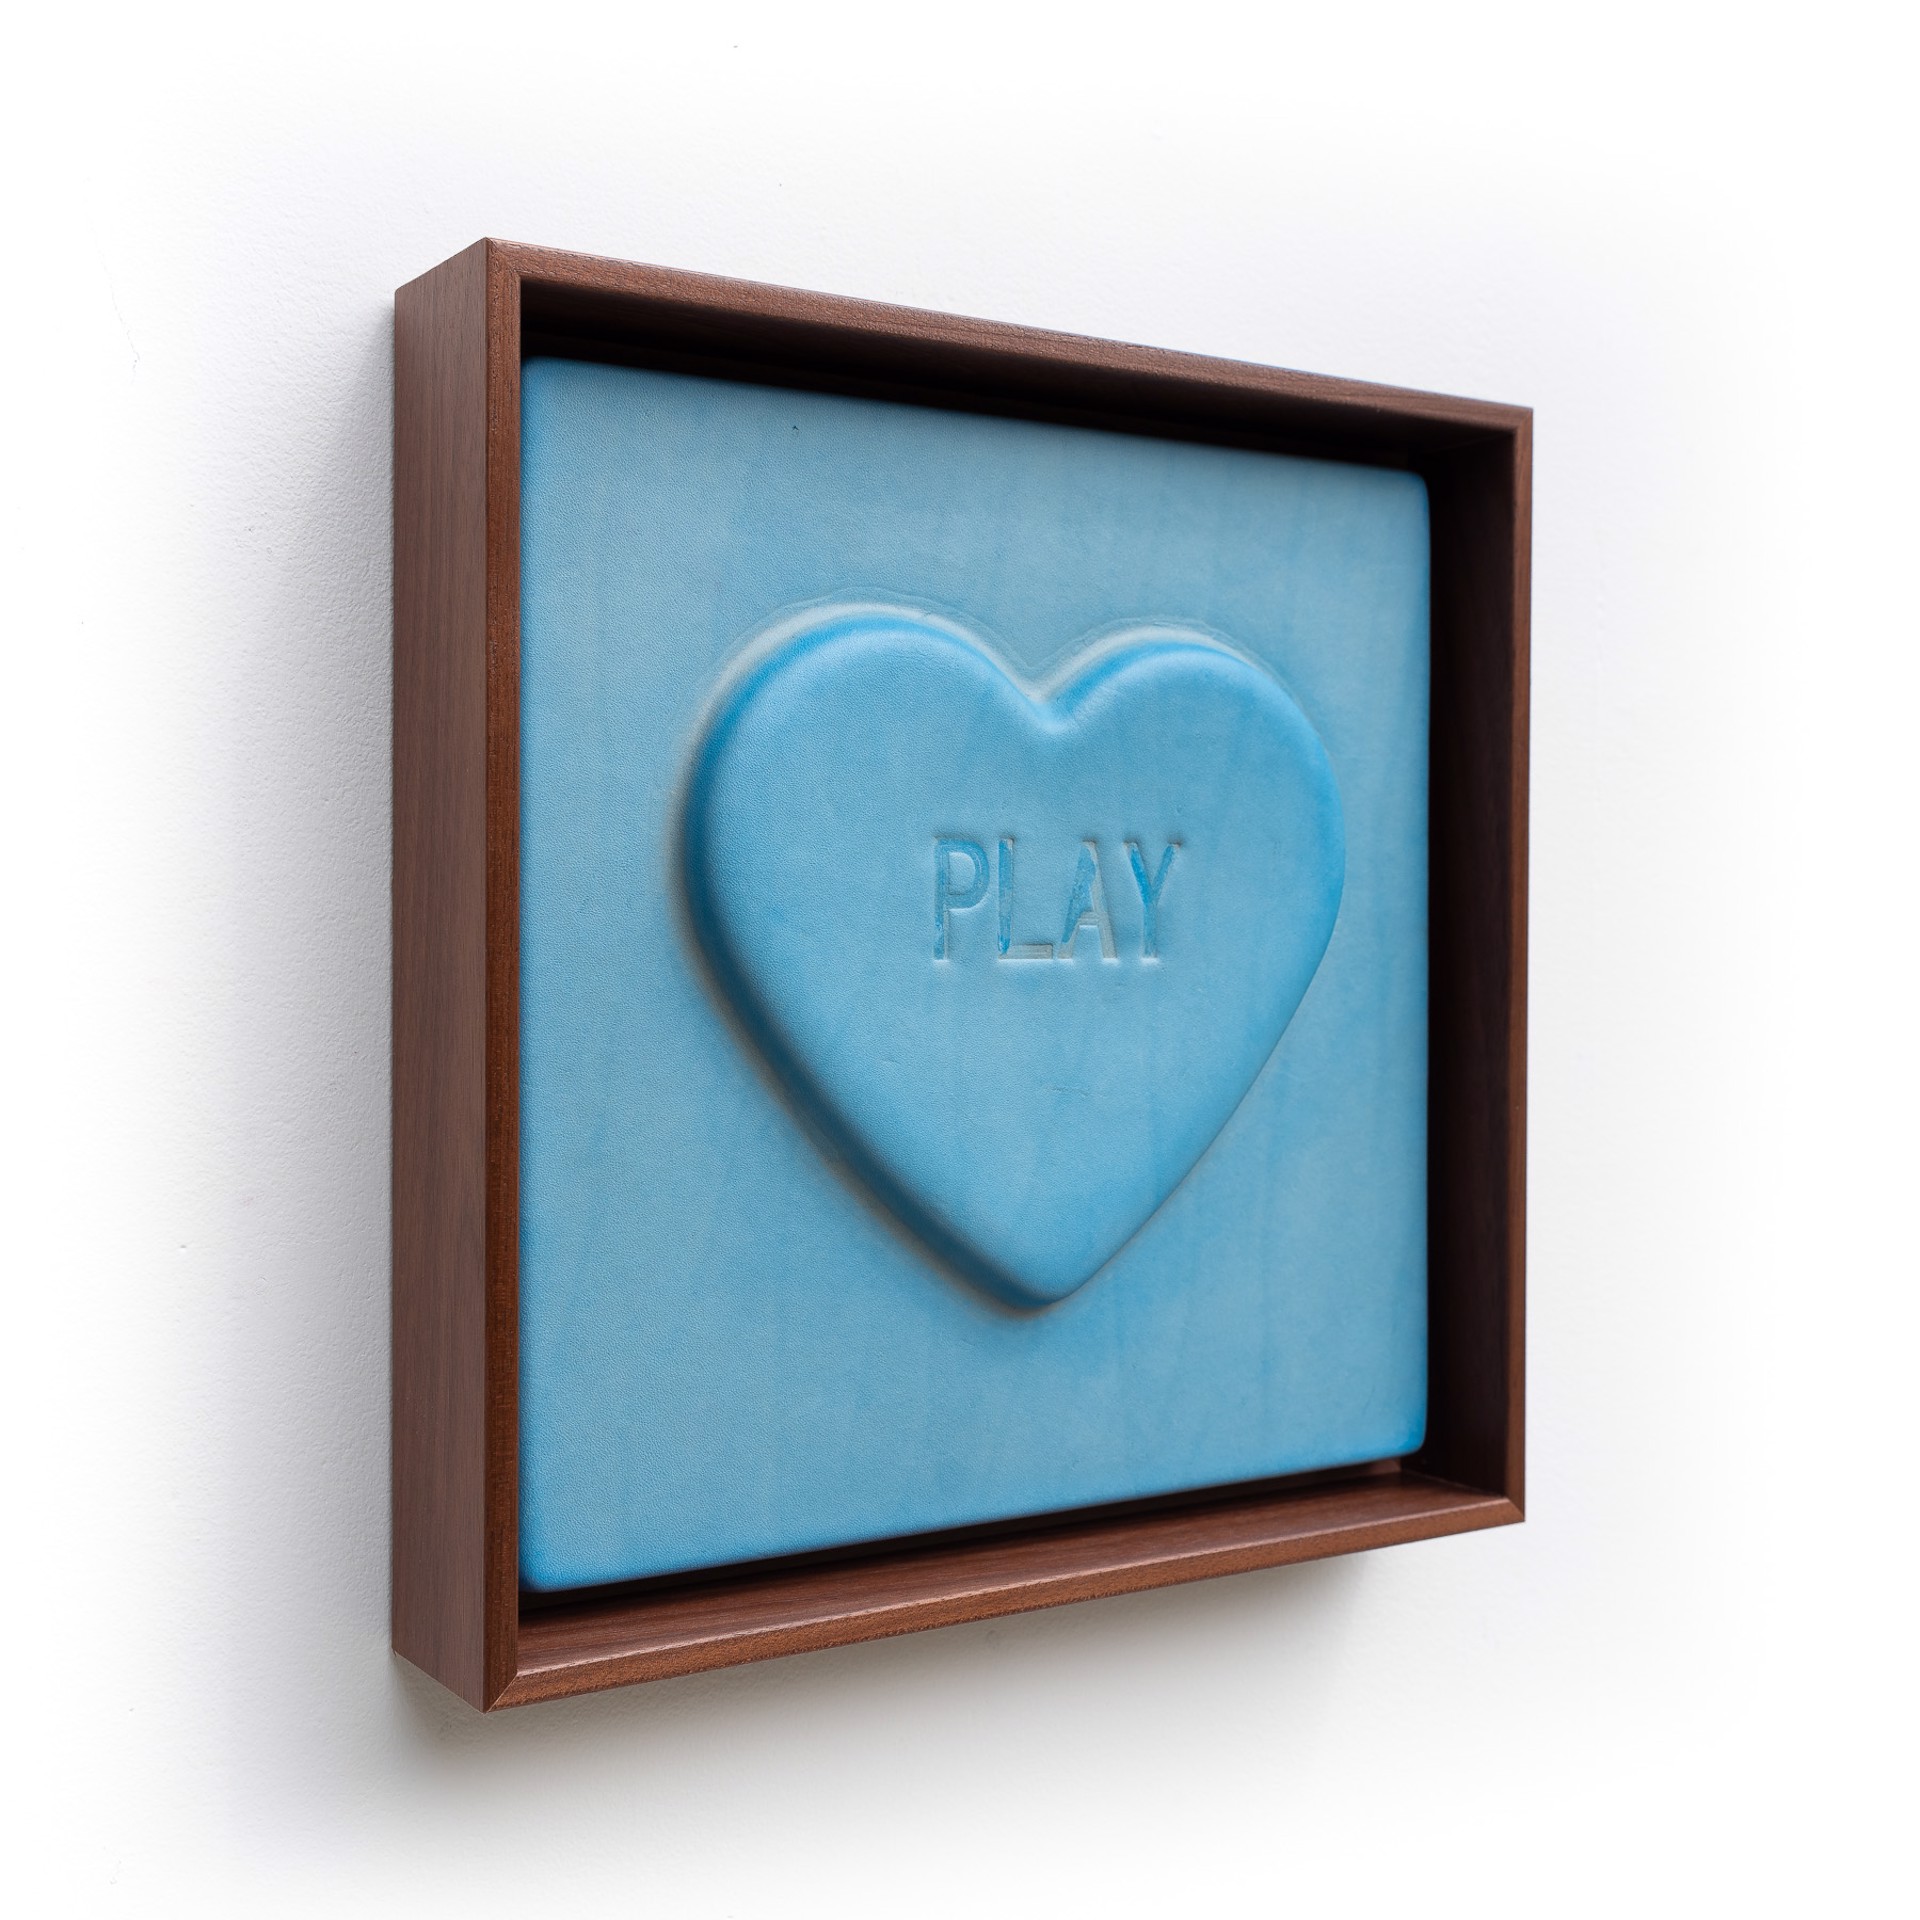 'PLAY' - Sweetheart series by Mx. Hyde